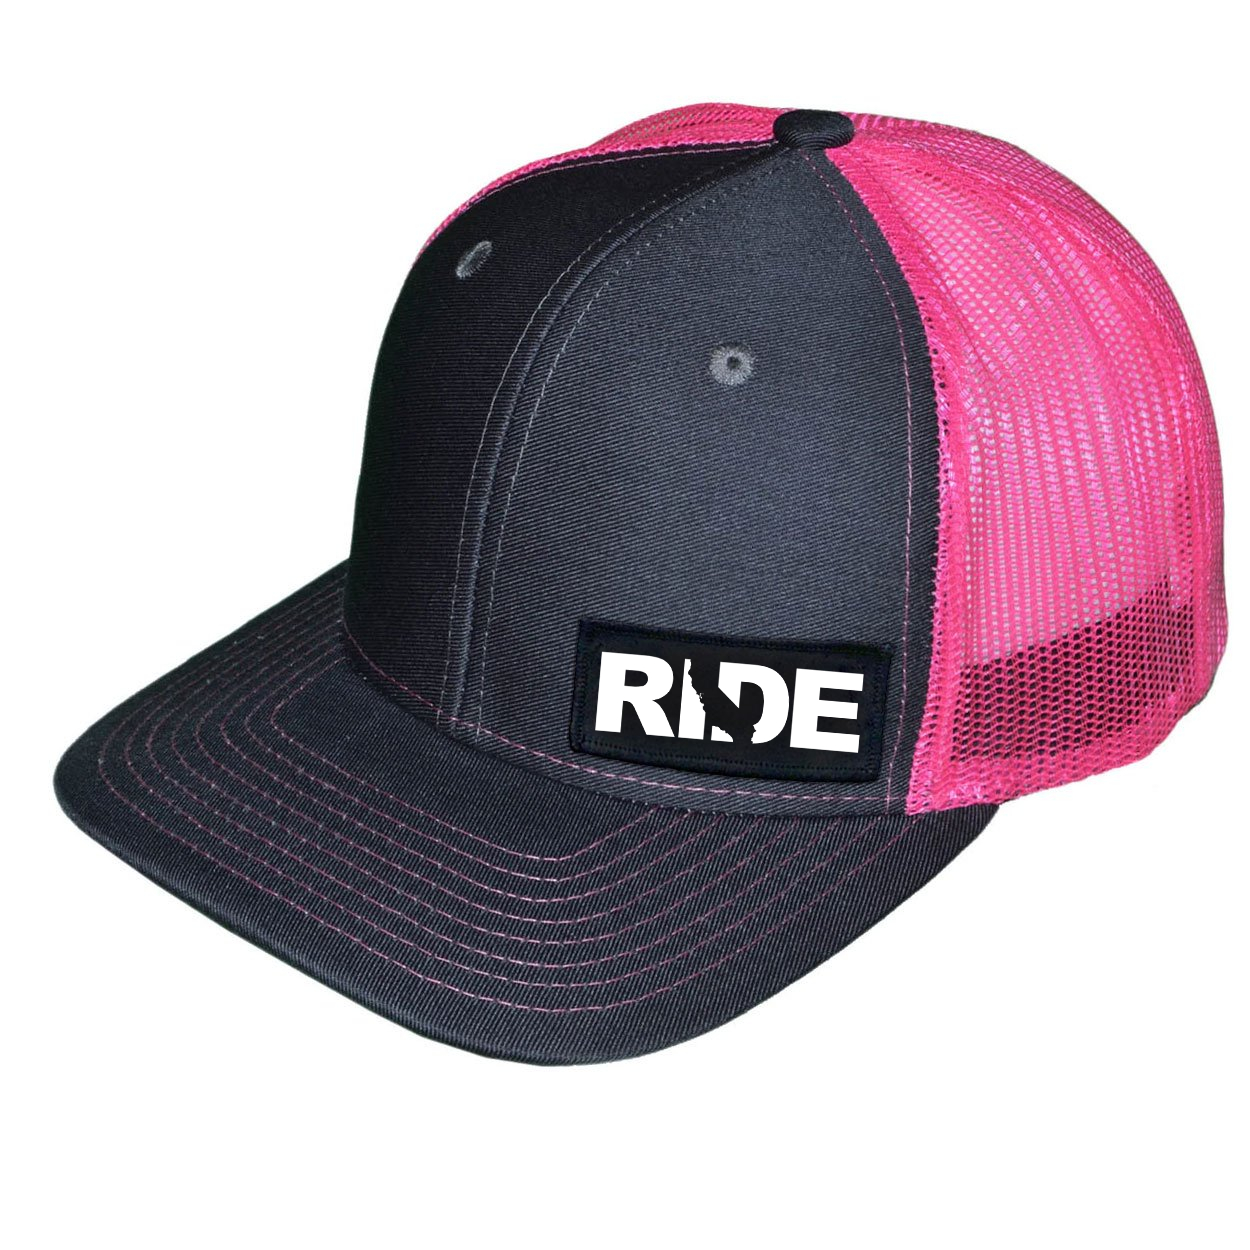 Ride California Night Out Woven Patch Snapback Trucker Hat Dark Gray/Neon Pink (White Logo)